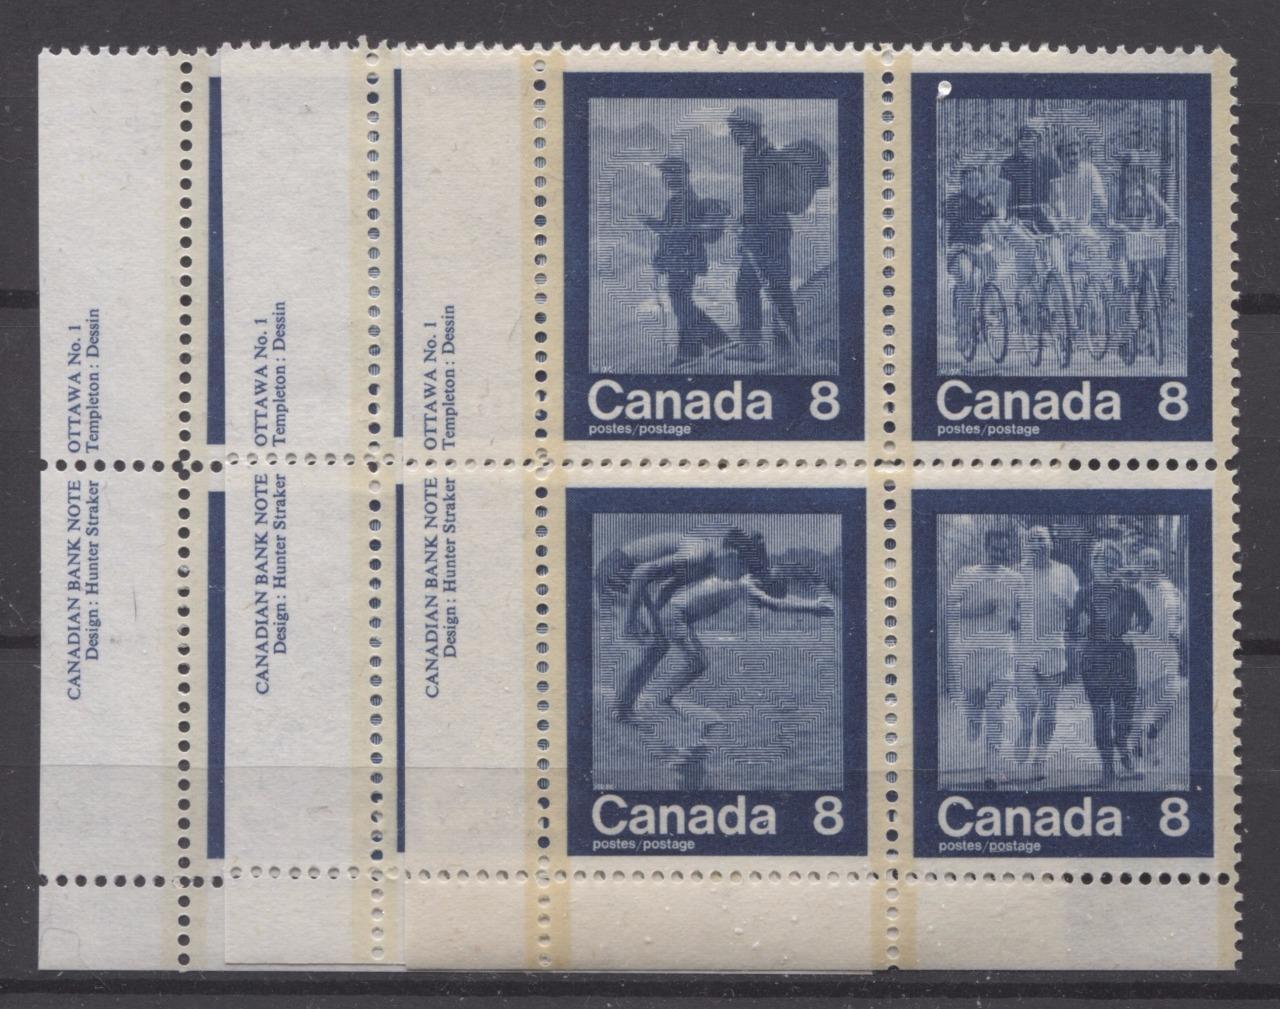 Canada #630-631 (SG#769-770) 1974 Summer Sports Issue "Jogging & Cycling" Paper/Tag Type 3 F-70 NH Brixton Chrome 